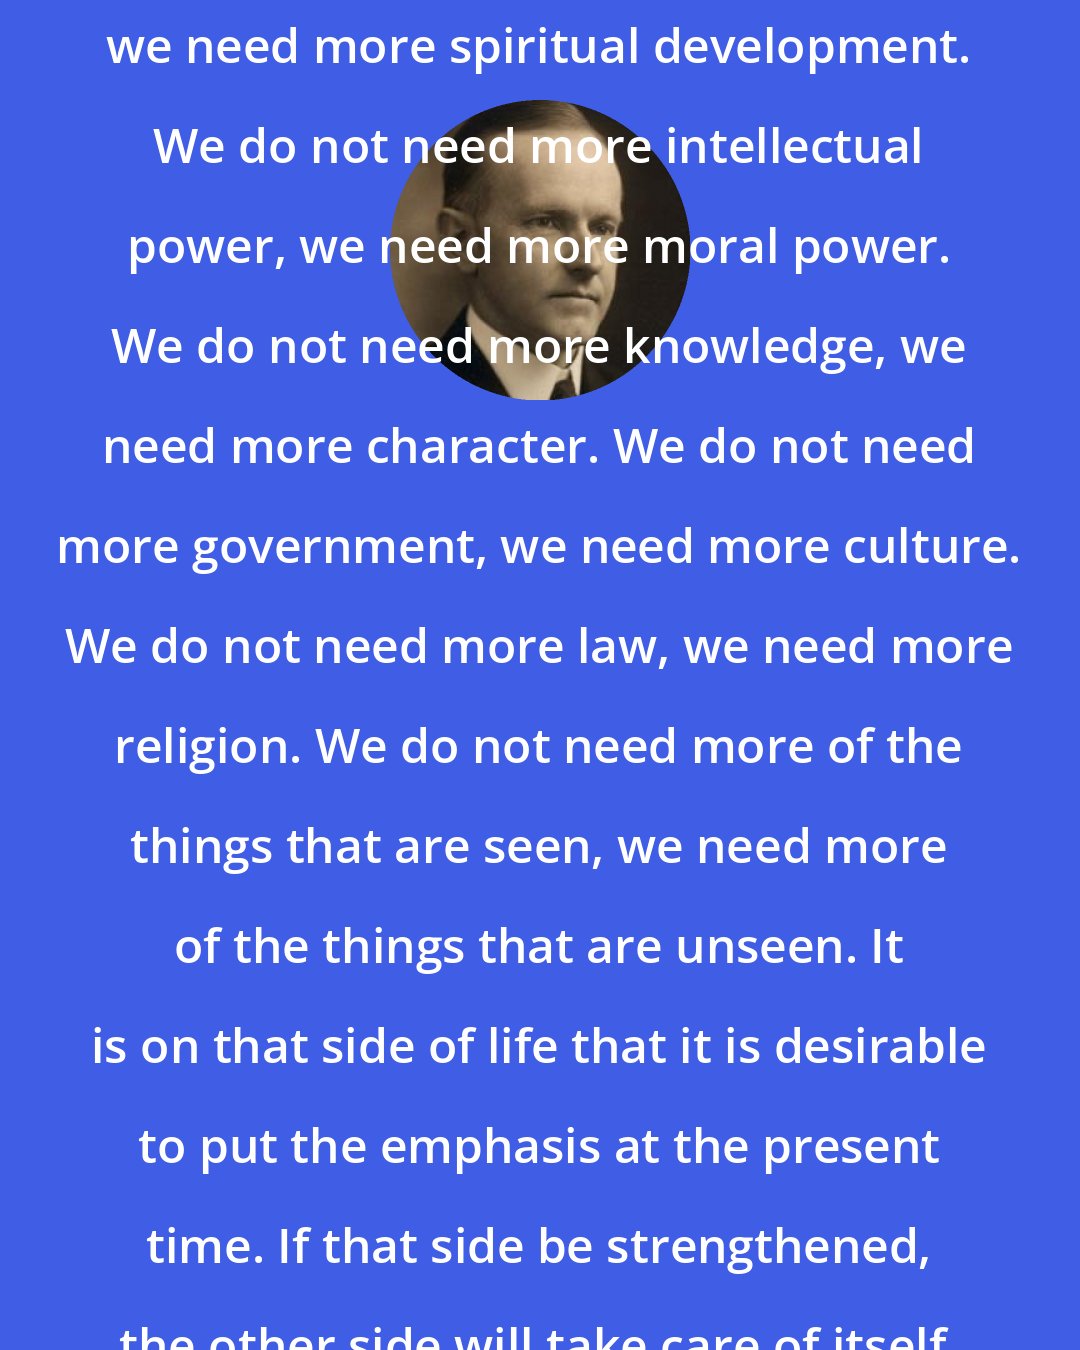 Calvin Coolidge: We do not need more material development, we need more spiritual development. We do not need more intellectual power, we need more moral power. We do not need more knowledge, we need more character. We do not need more government, we need more culture. We do not need more law, we need more religion. We do not need more of the things that are seen, we need more of the things that are unseen. It is on that side of life that it is desirable to put the emphasis at the present time. If that side be strengthened, the other side will take care of itself.